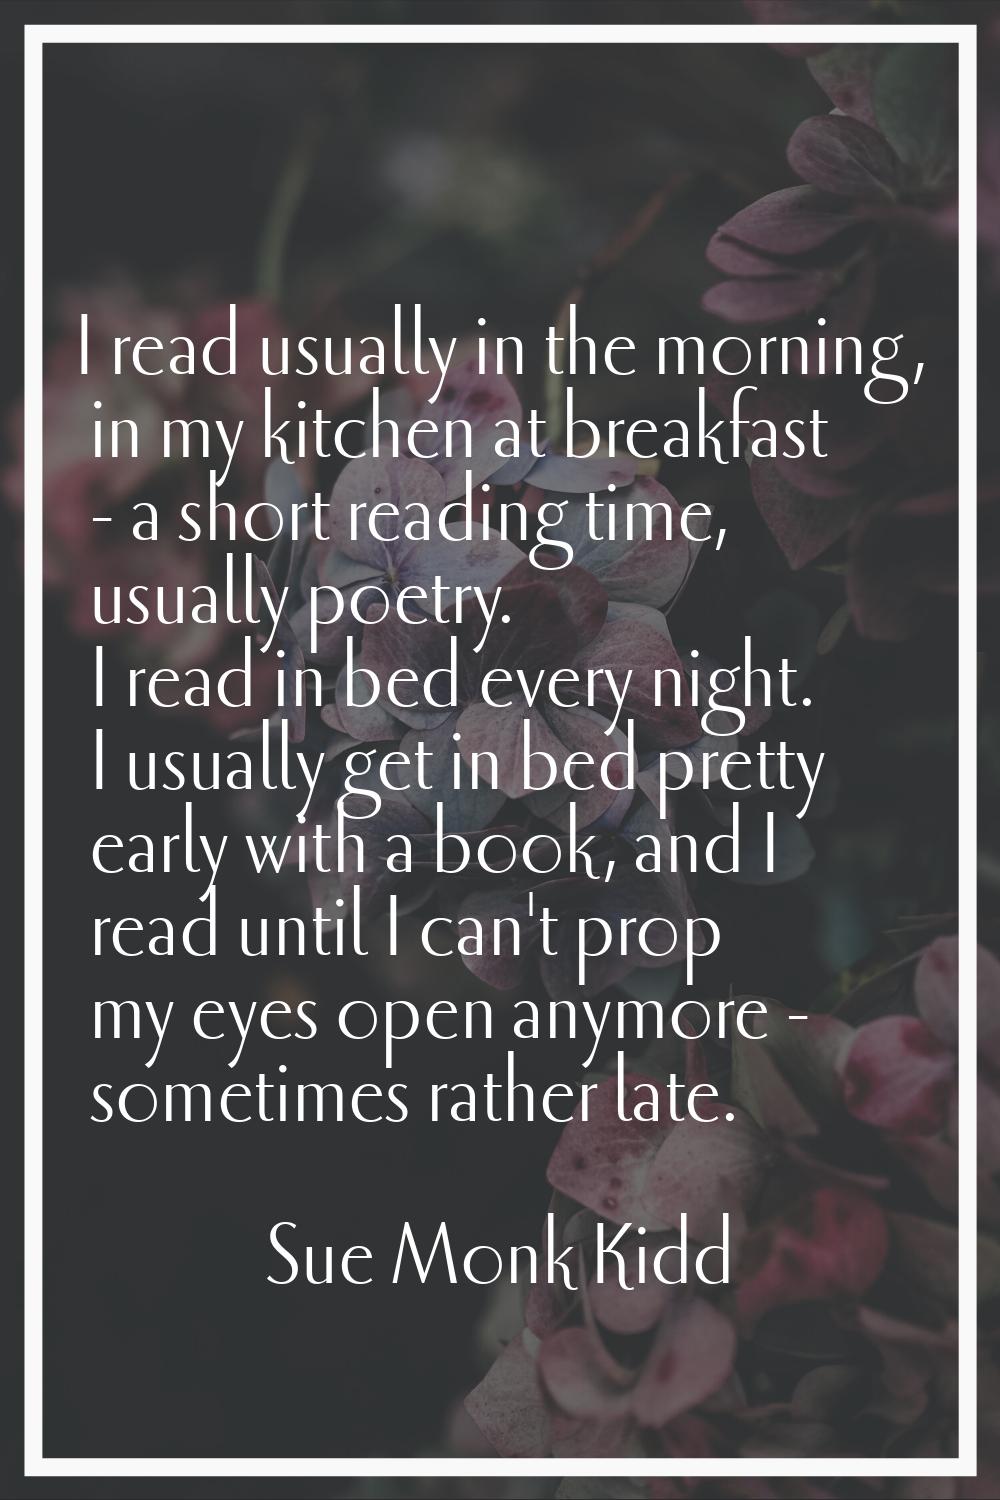 I read usually in the morning, in my kitchen at breakfast - a short reading time, usually poetry. I